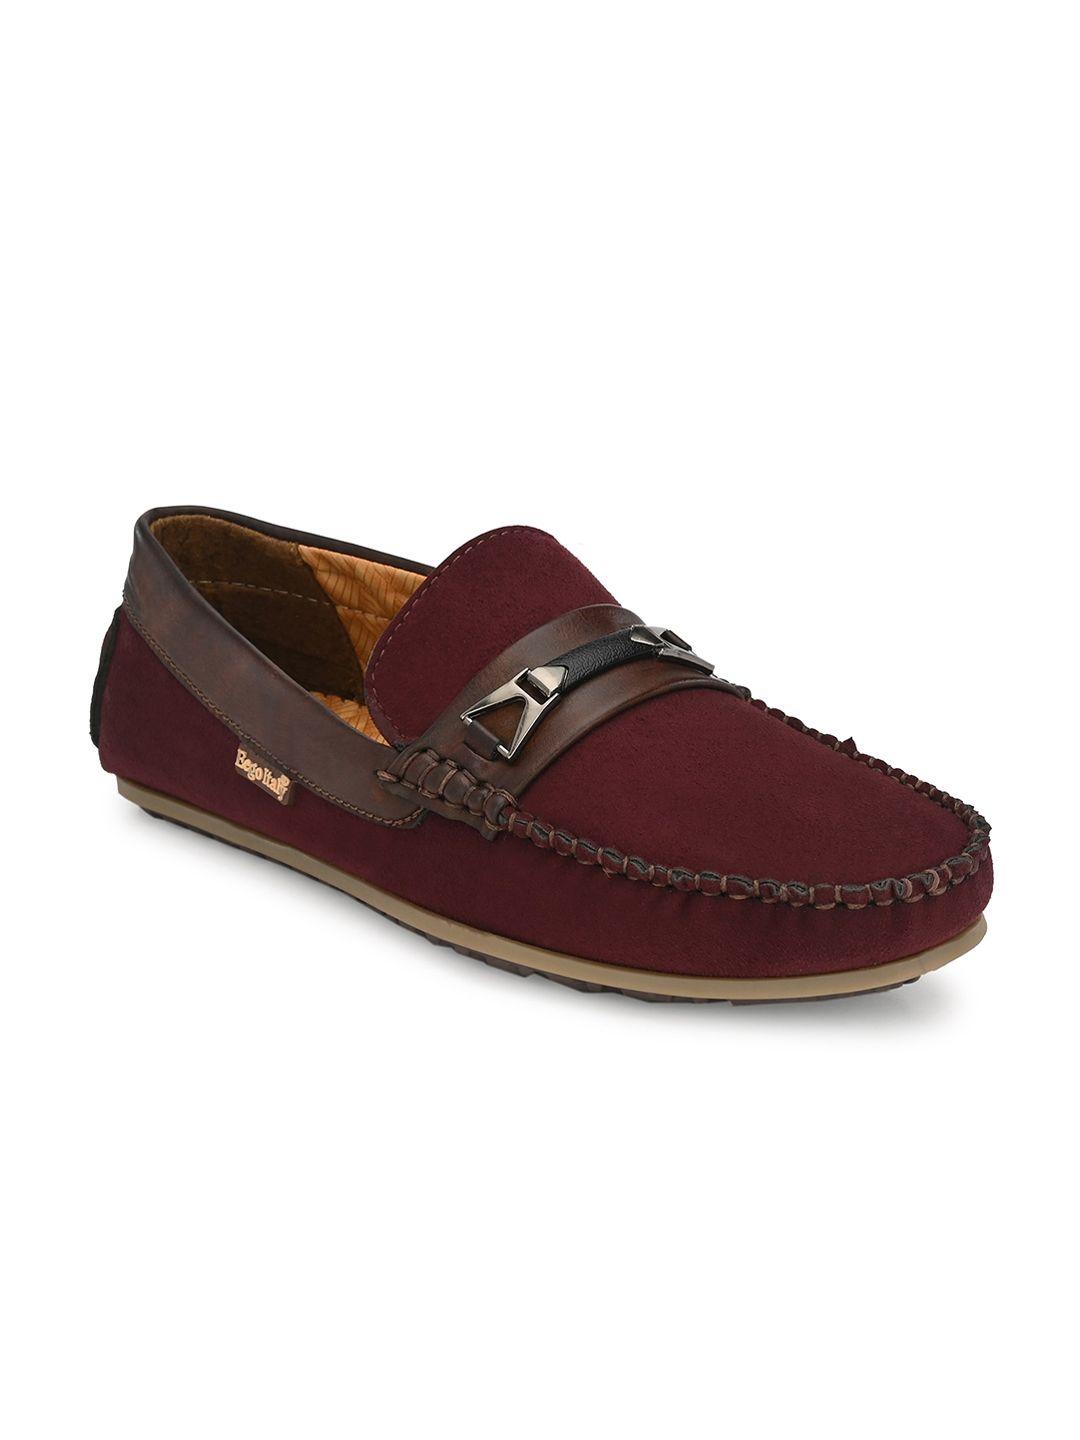 eego italy men slip on loafers shoes